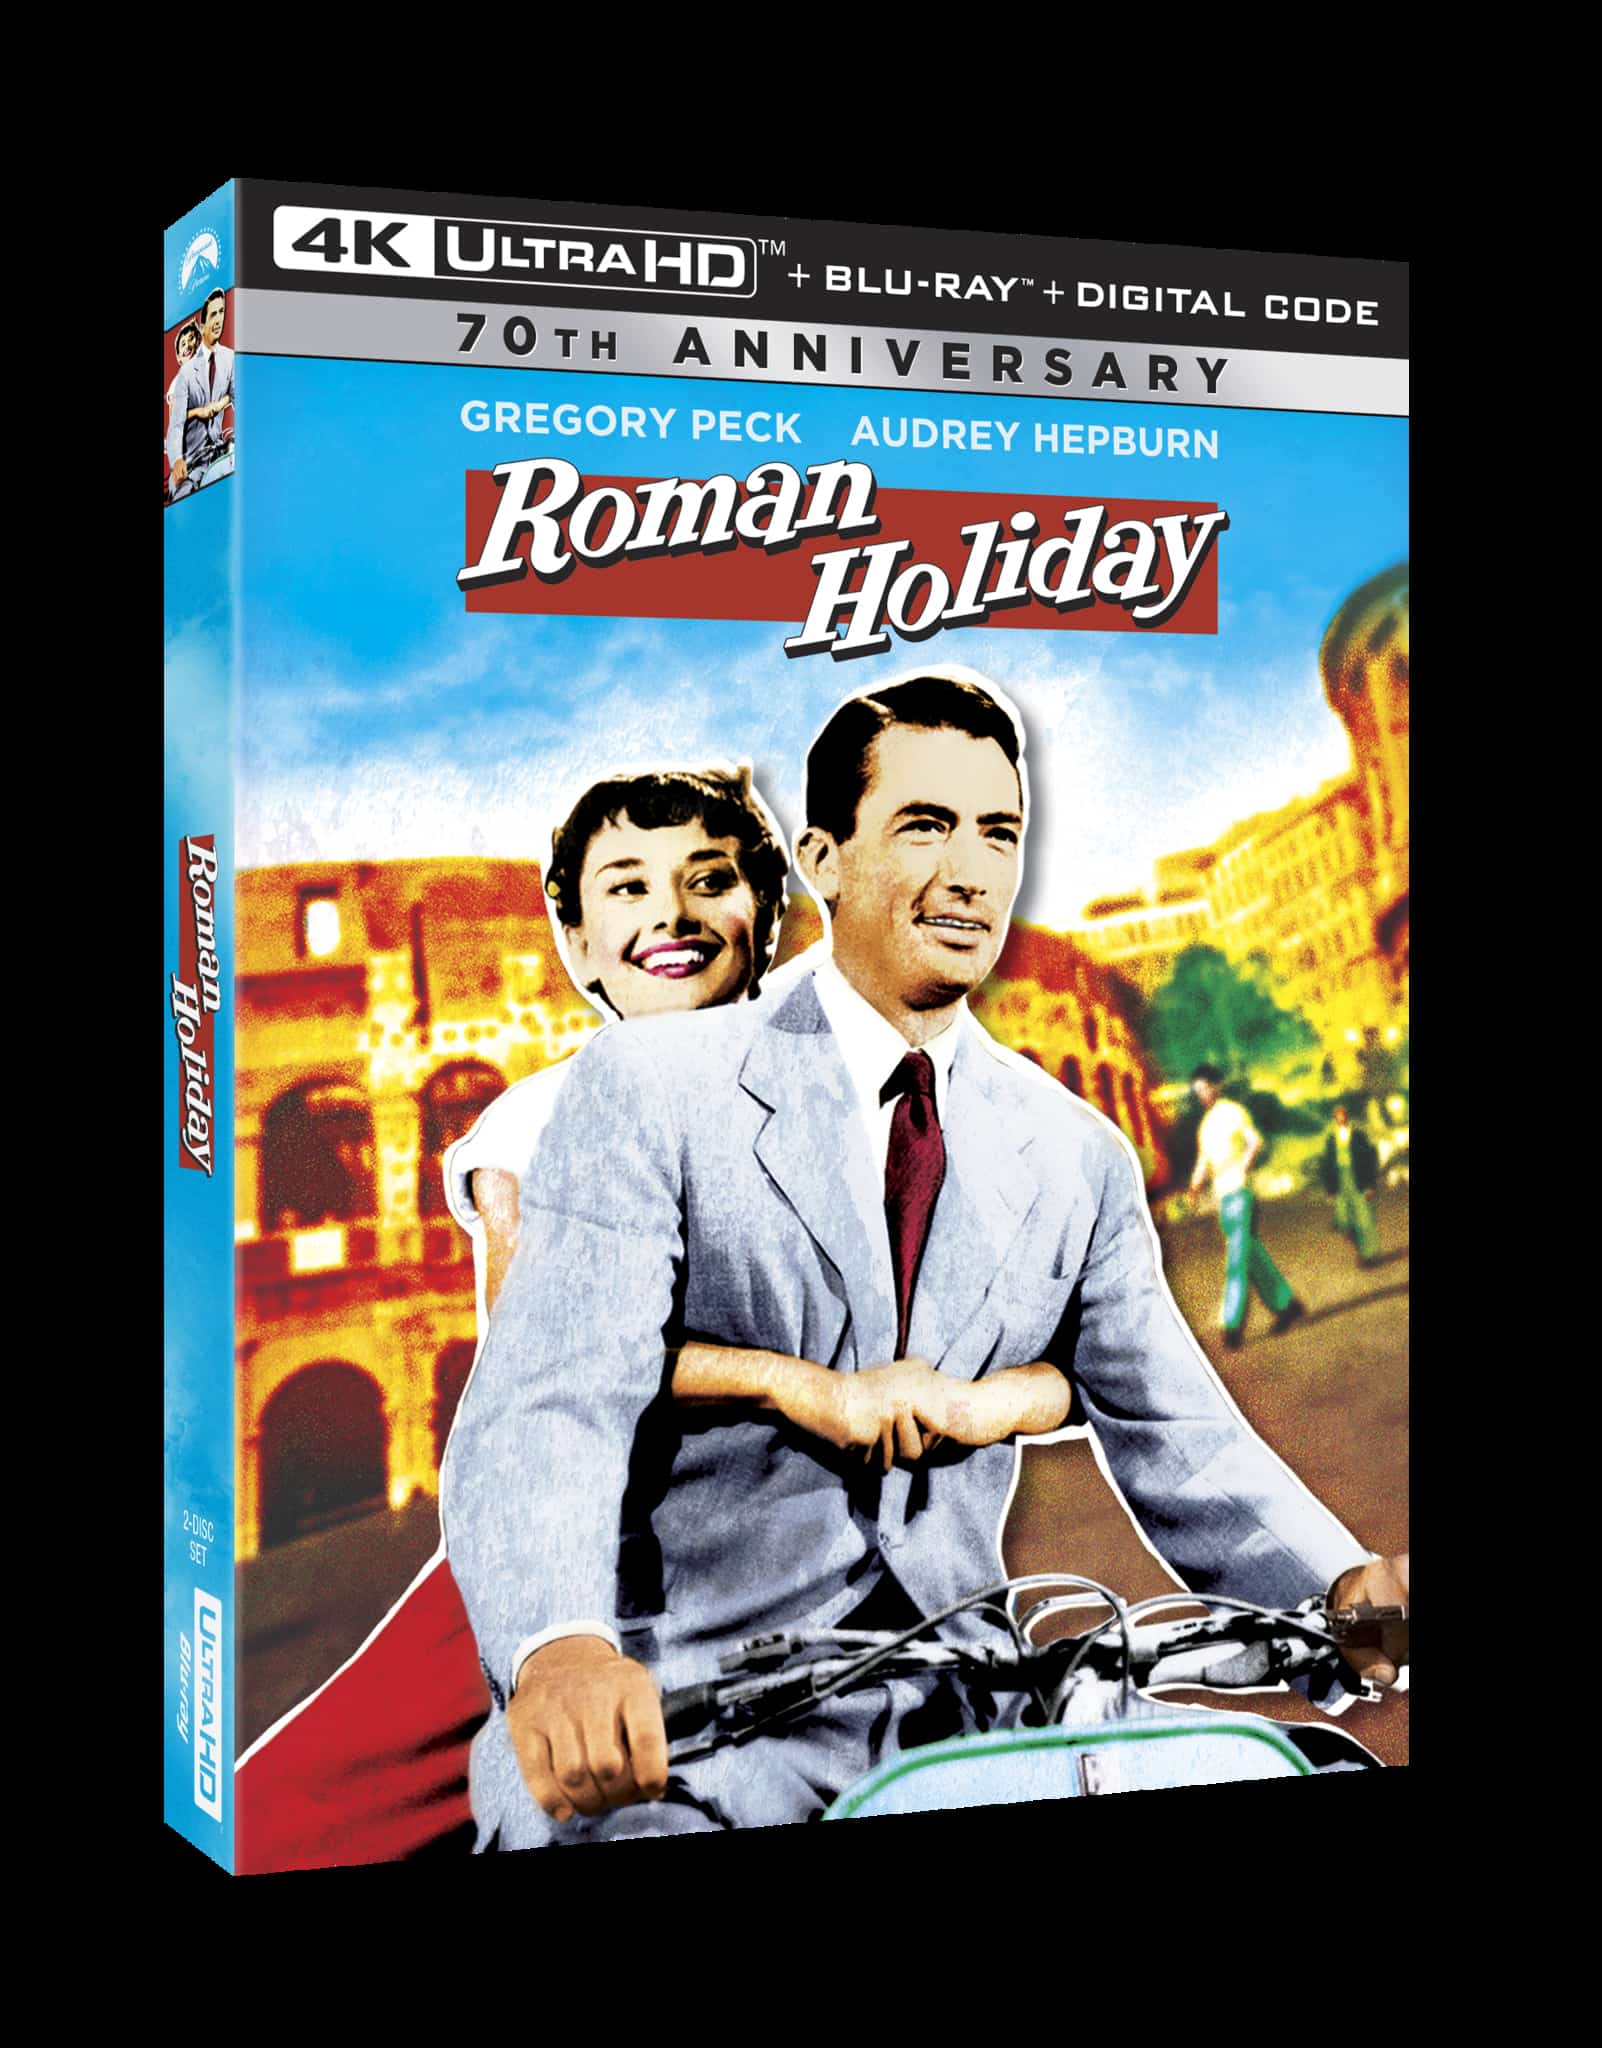 A Timeless Love Story Reimagined: ROMAN HOLIDAY Turns 70 with a Stunning 4K Ultra HD™ Release 19